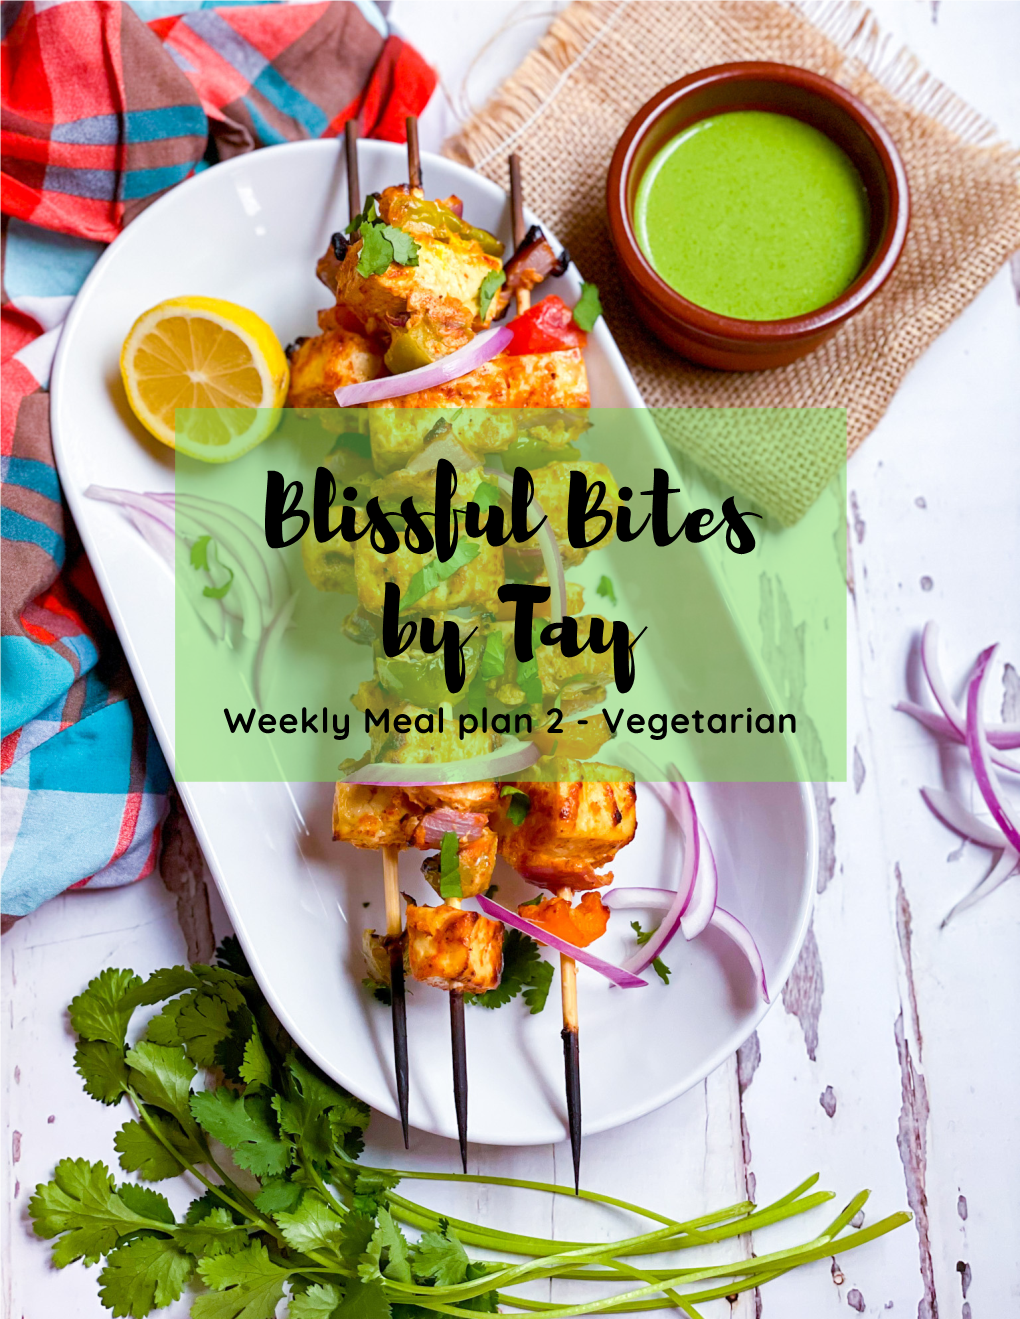 Blissful Bites by Tay Weekly Meal Plan 2 - Vegetarian BLISSFUL Weekly Meal Plan 2 BITES by TAY